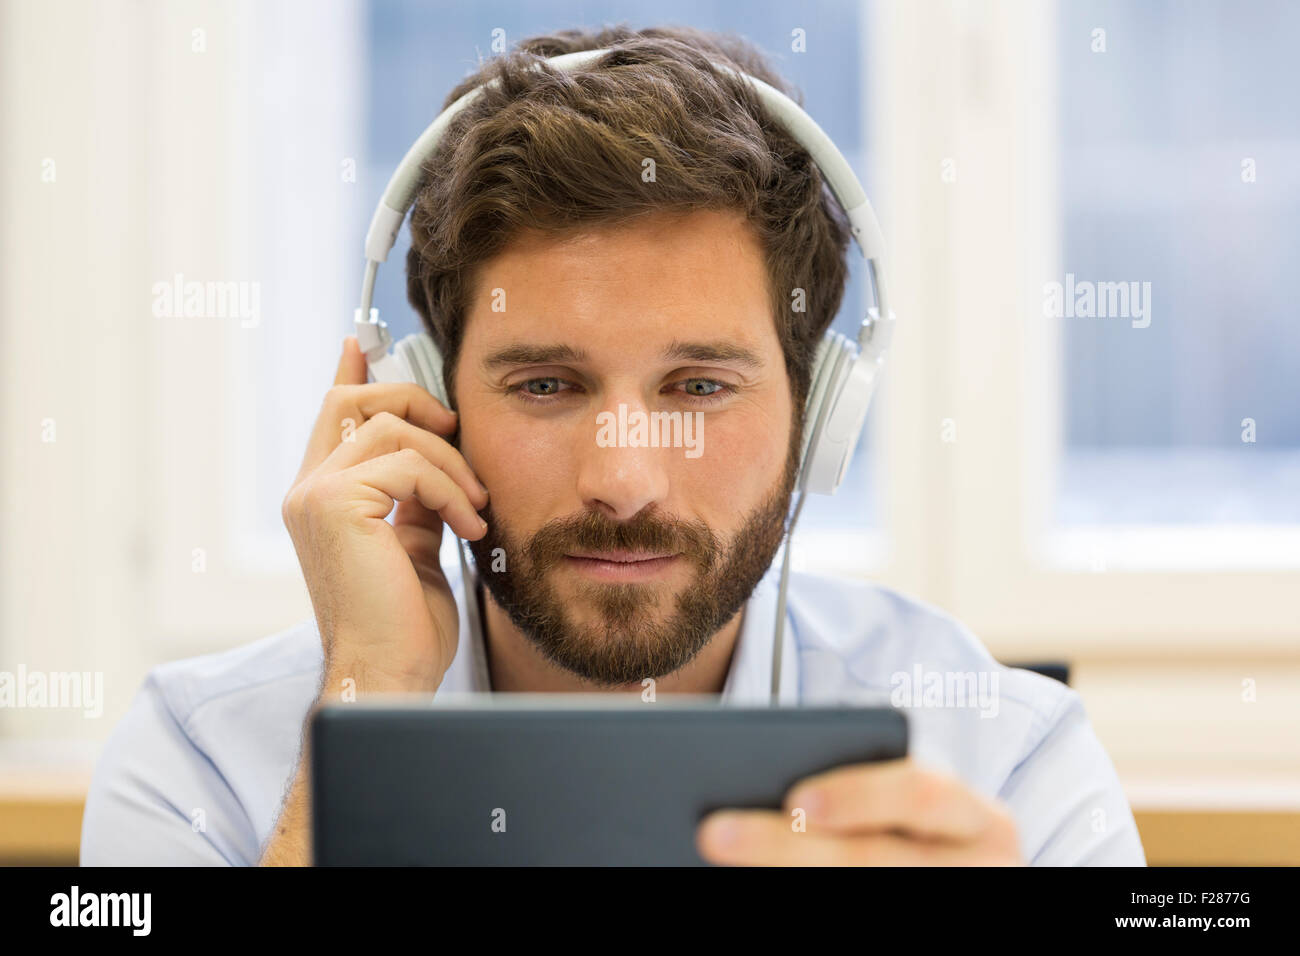 Creative businessman listening to headphones and using digital tablet. Stock Photo